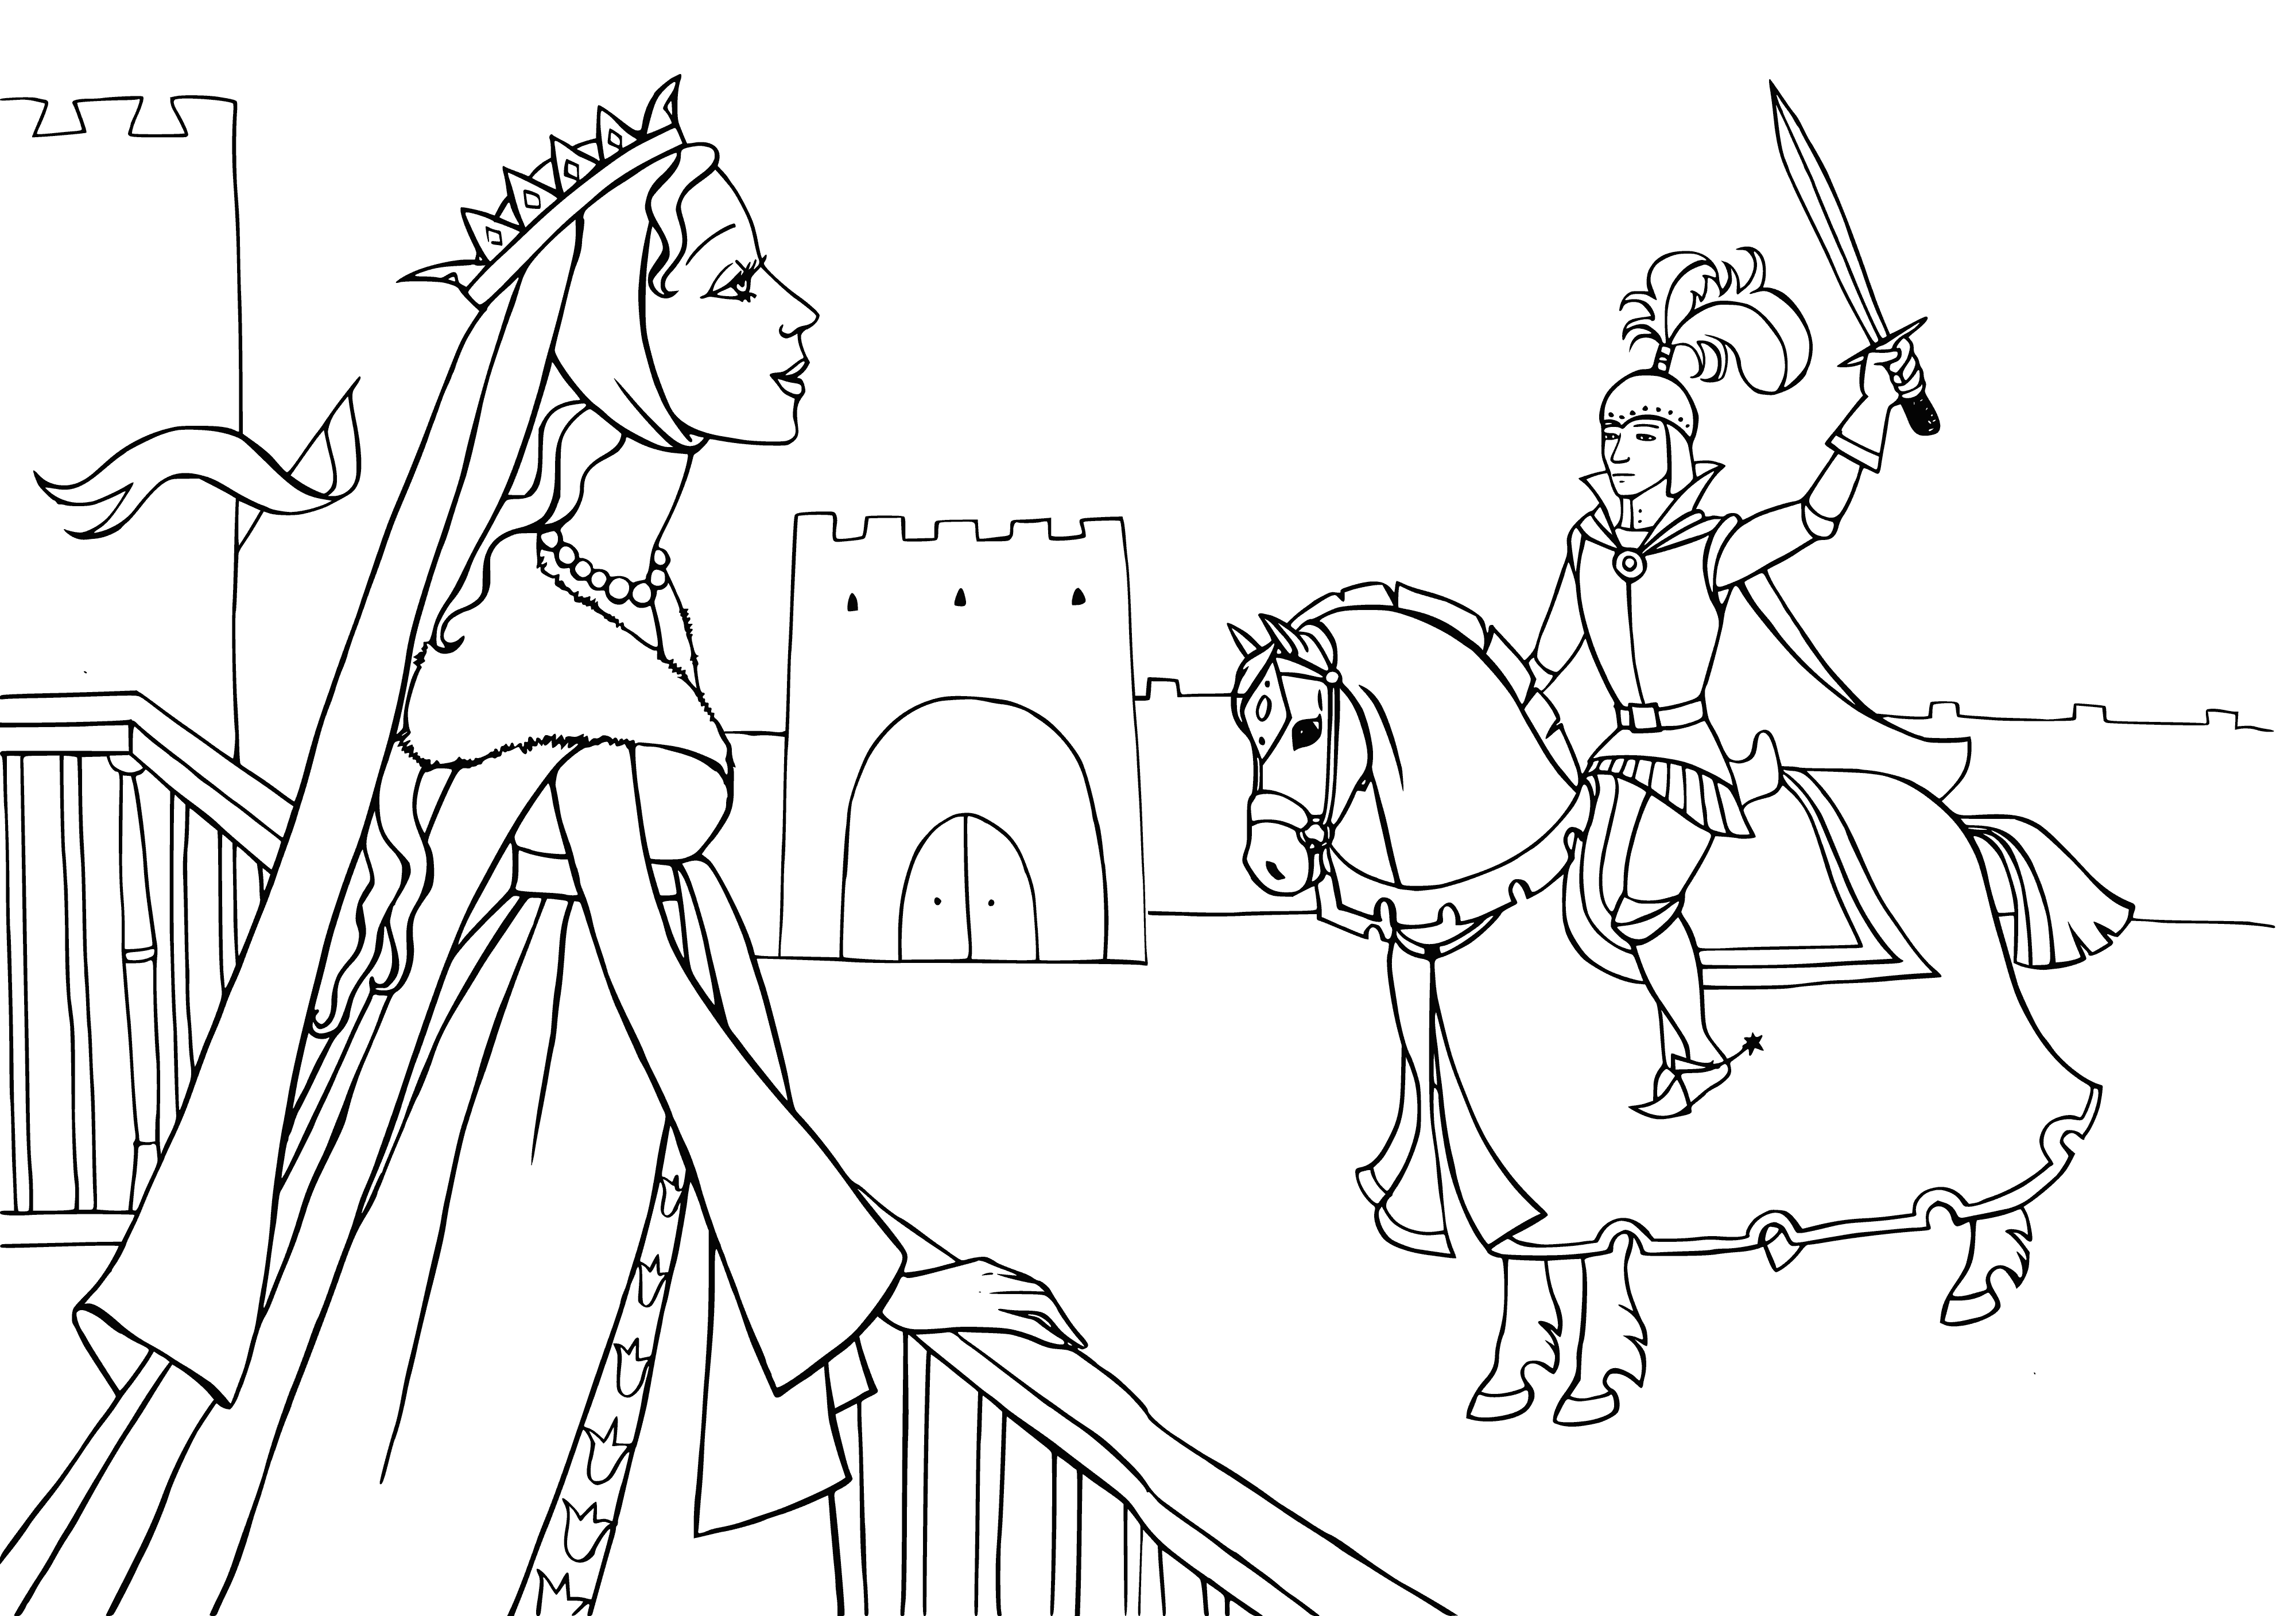 Knight Tournament coloring page